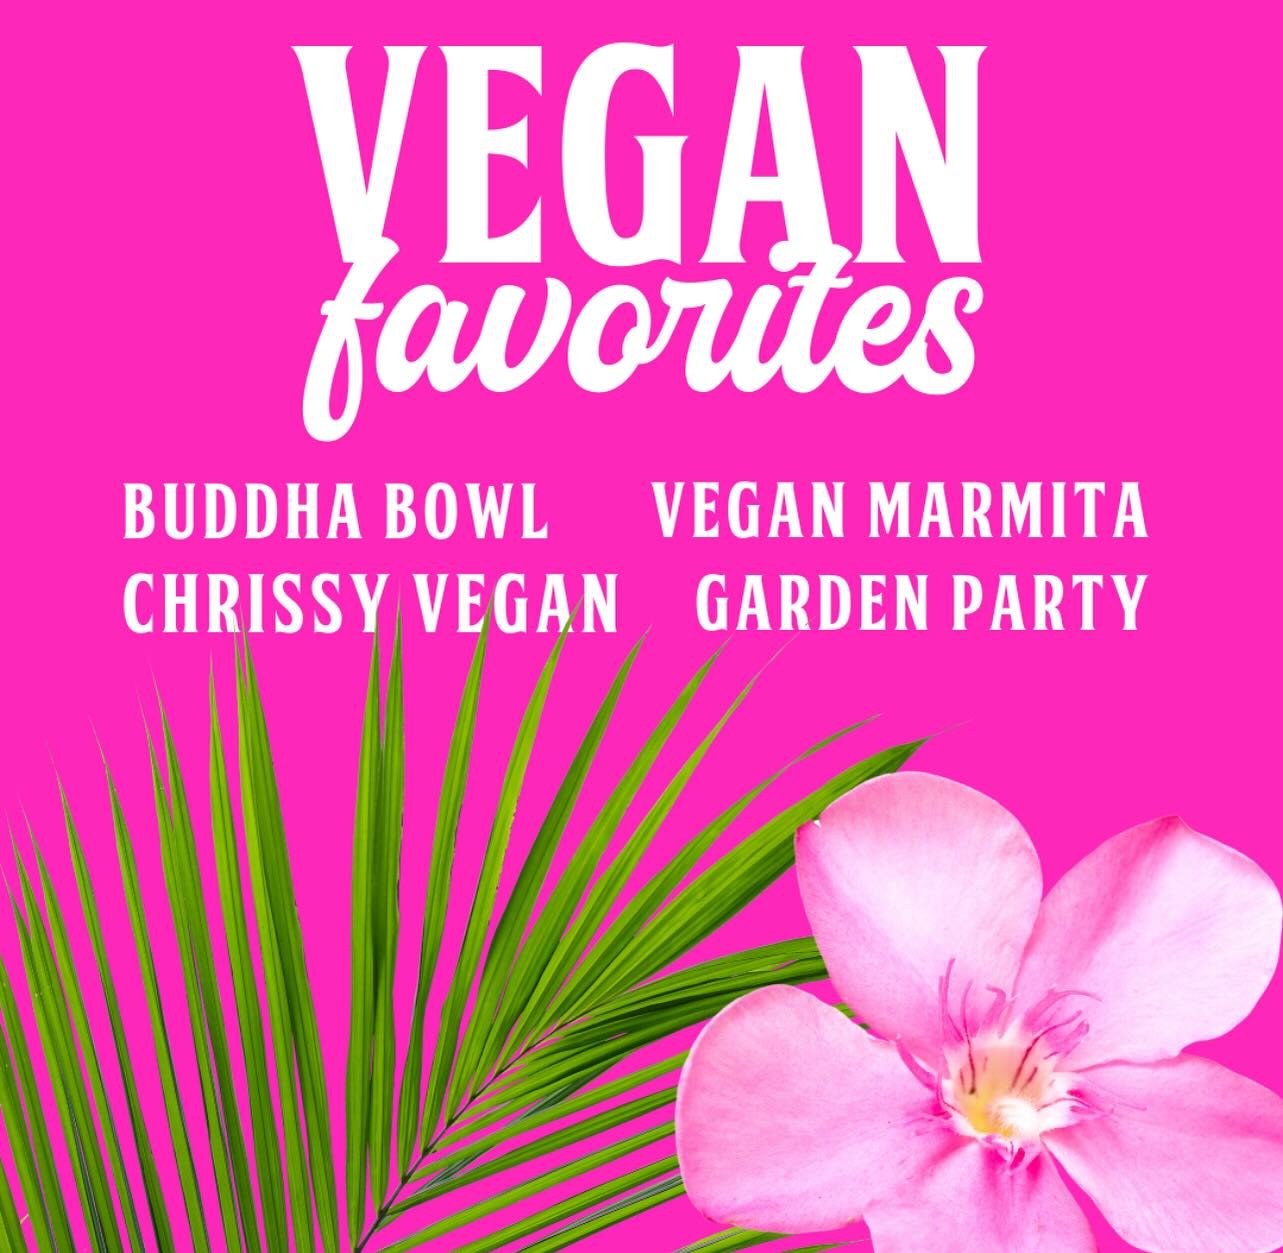 Along with our juice bar being a dedicated vegan &amp; gluten free zone, our kitchen also prepares these delicious vegan friendly favorites. What&rsquo;s your favorite??